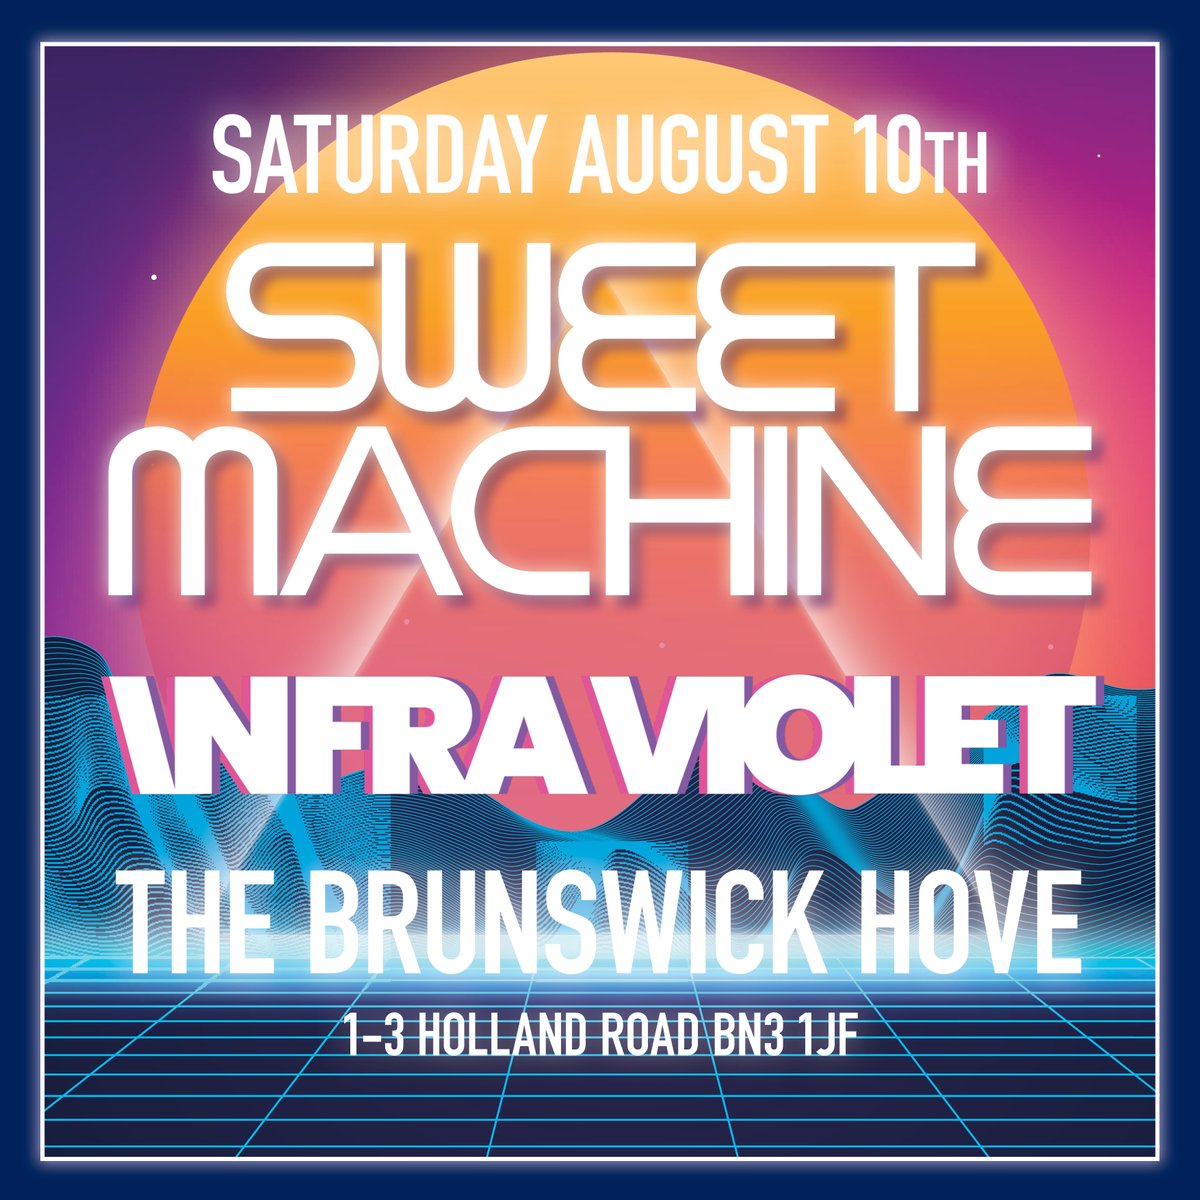 Saturday August 10th @Brunswickpub with @infravioletuk #Hove Looking forward to playing with Toby & Beth & this coming summer. Original music, sunshine & positive vibes etc! more soon... #synthpop #synthwave #electropop #indiepop #retrowave #retrosynth #90smusic #80smusic